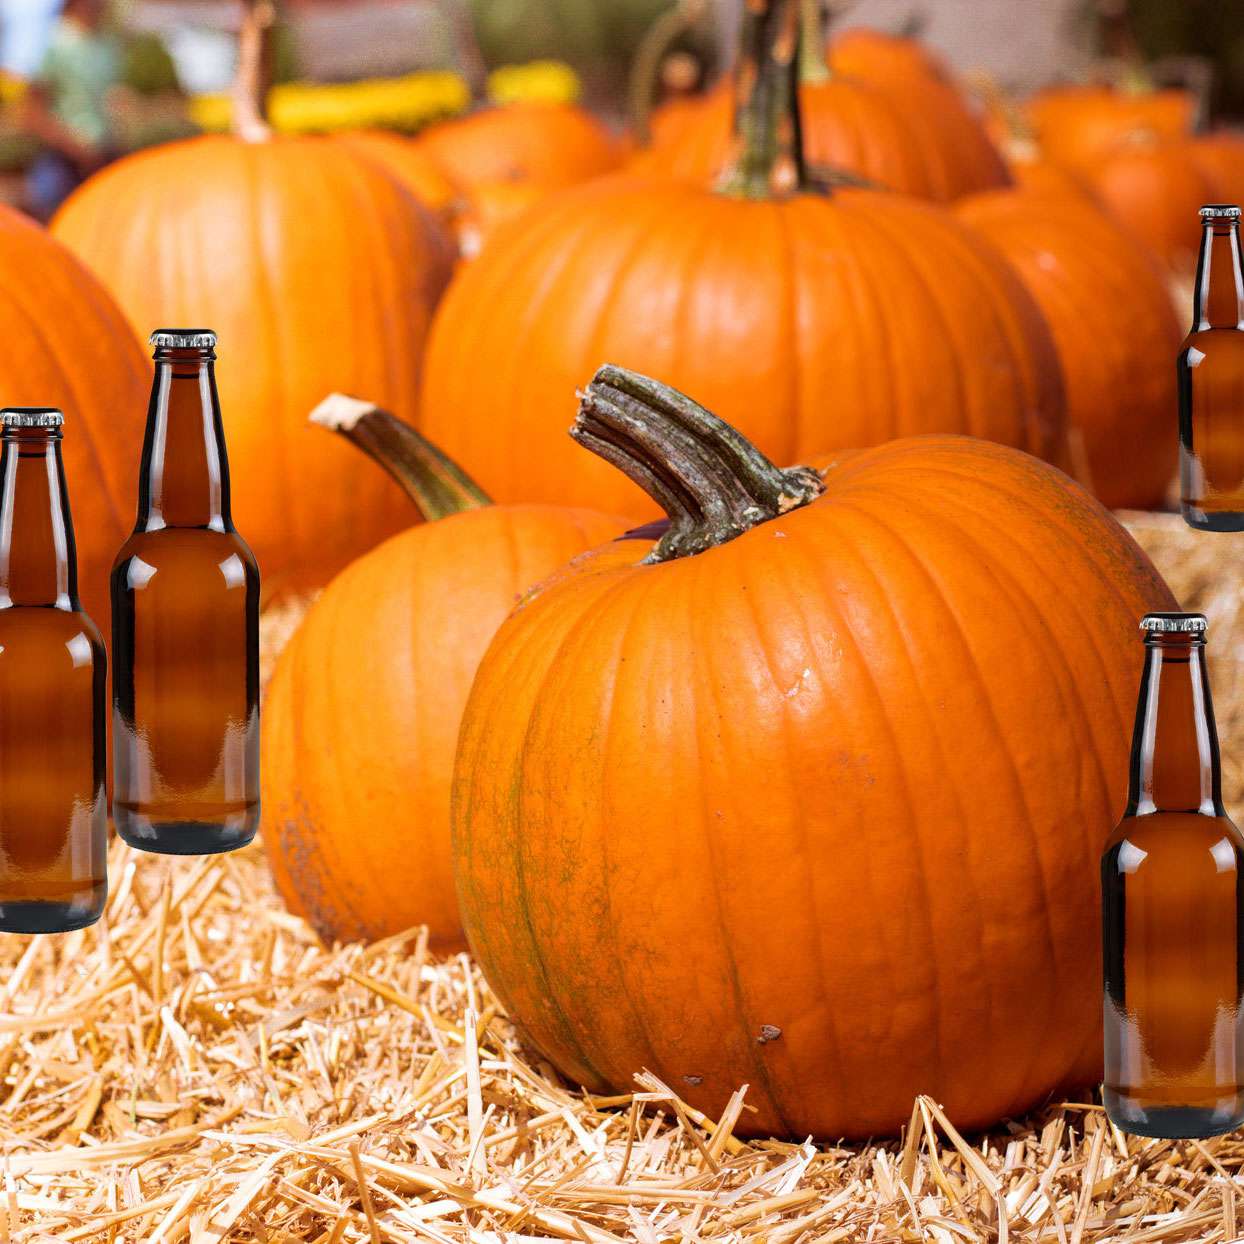 Pumpkins with beer bottles placed around them